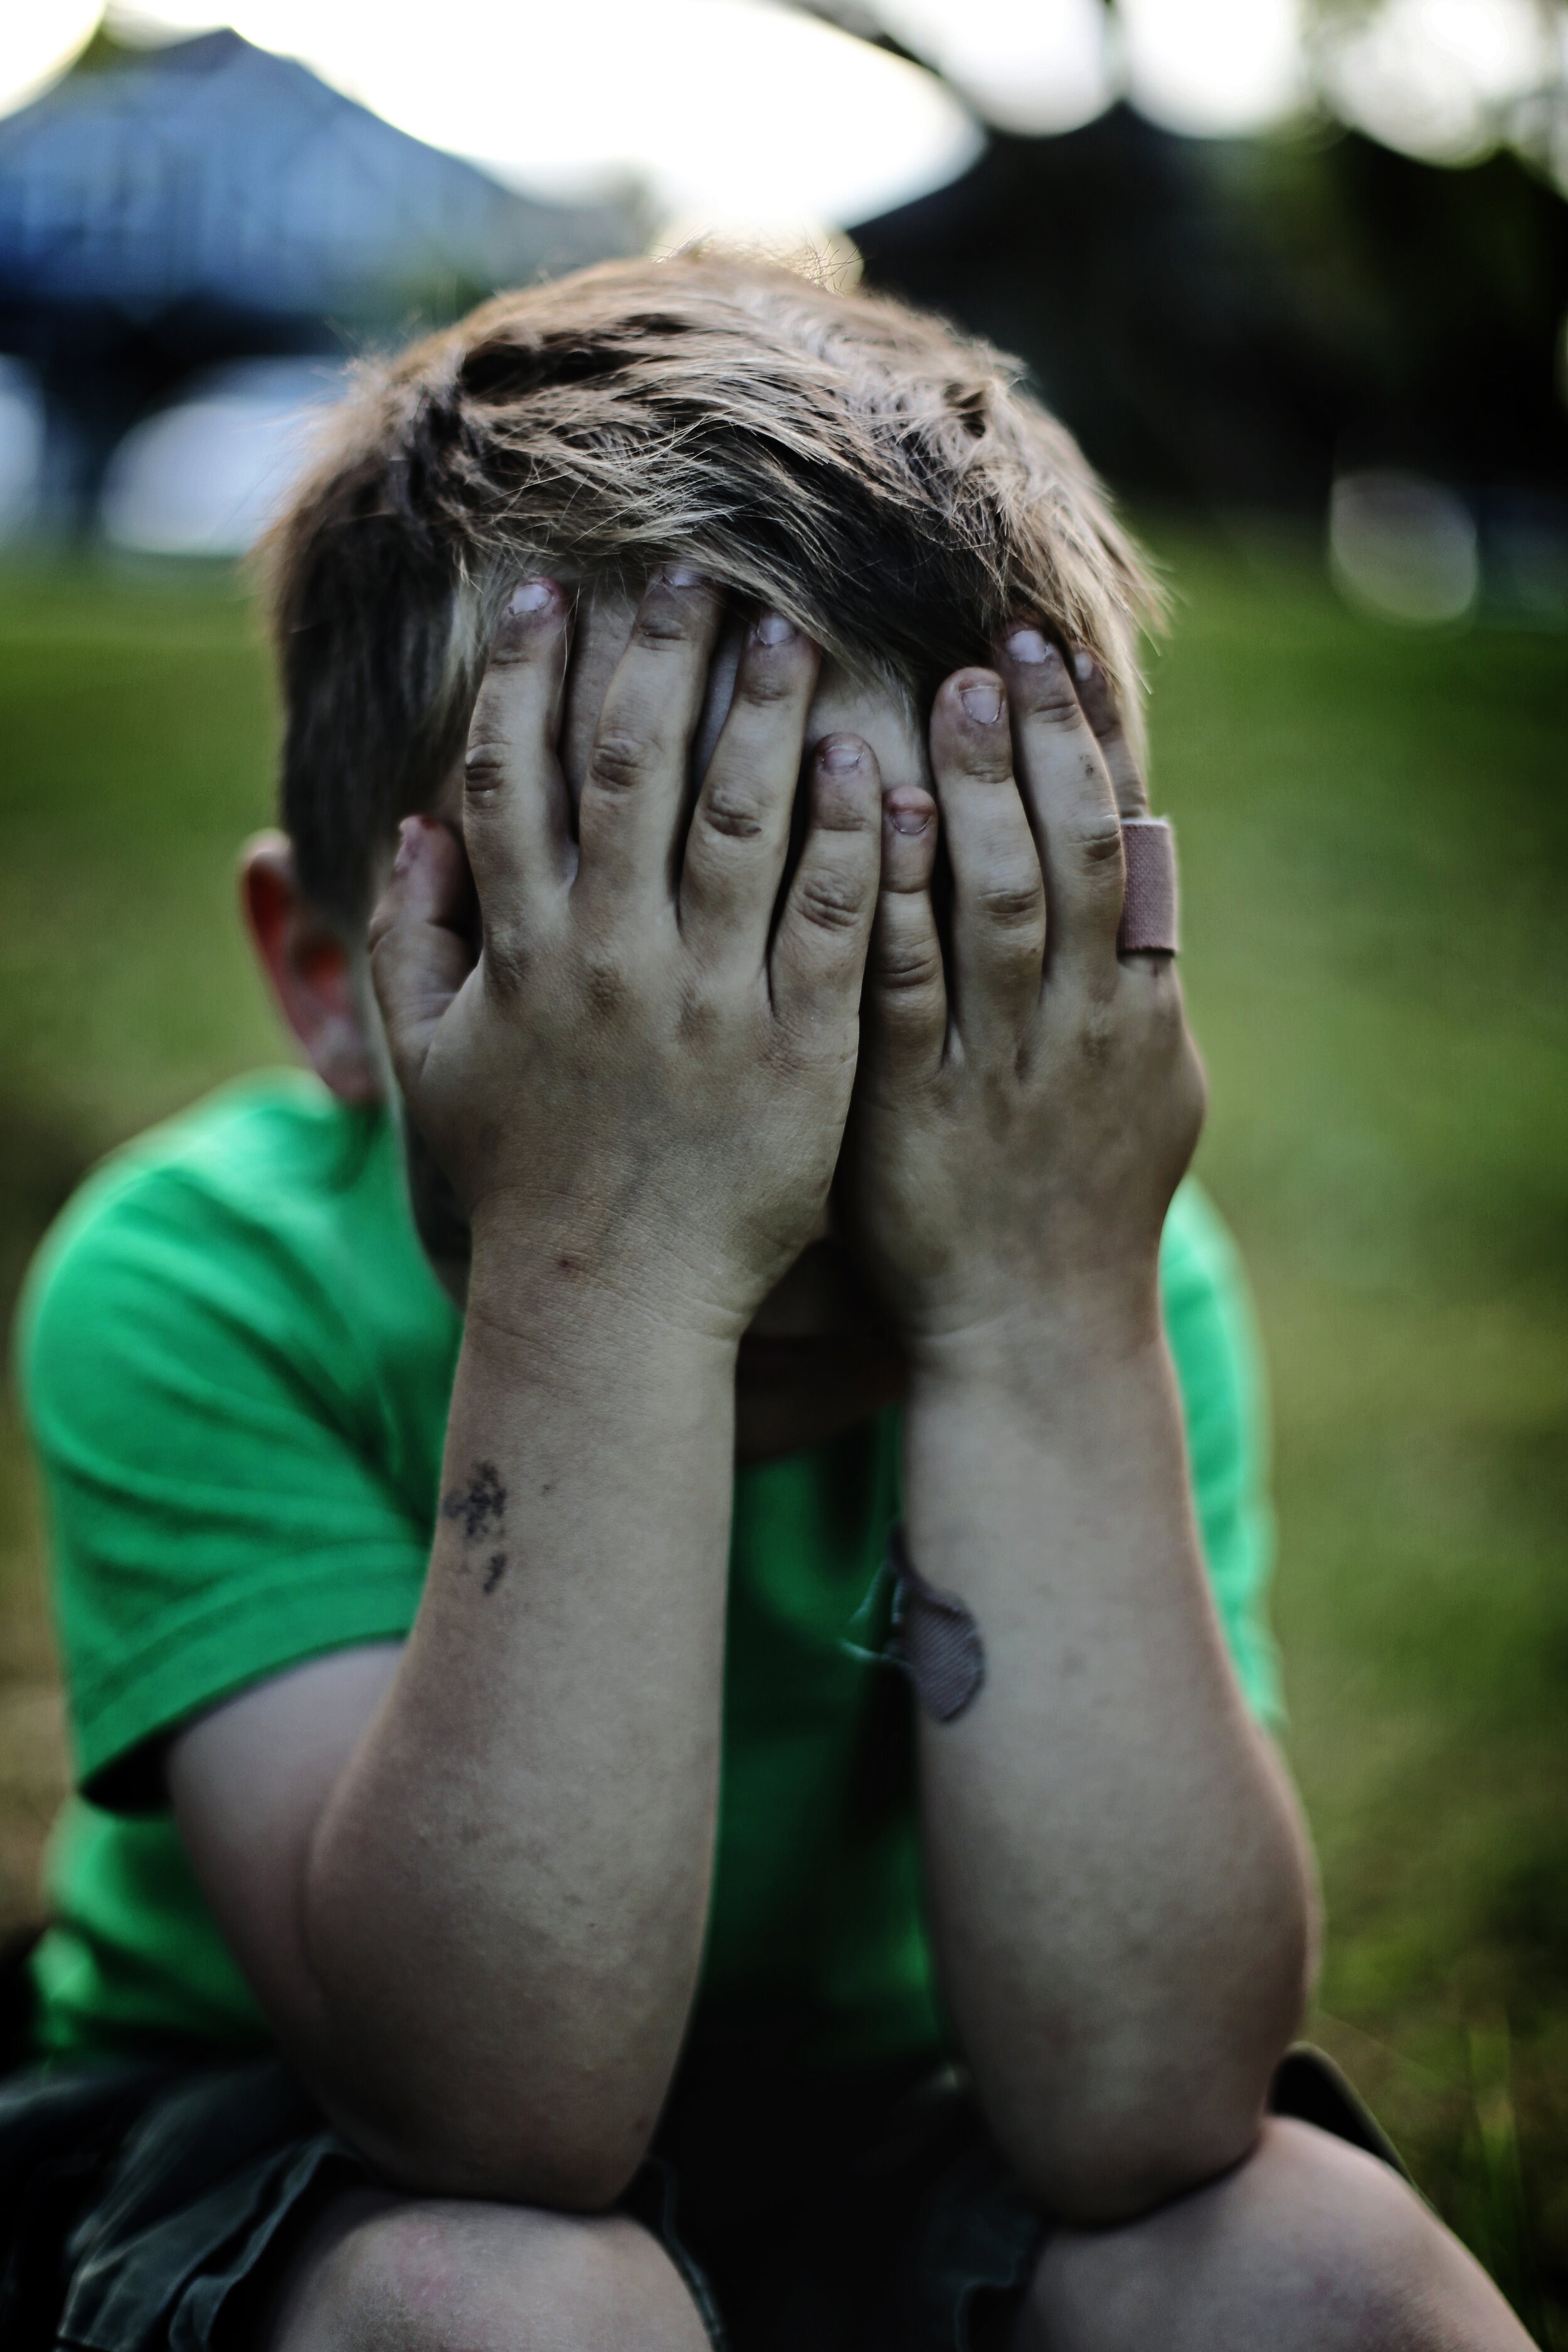  Children in care services are at ‘breaking point’ 